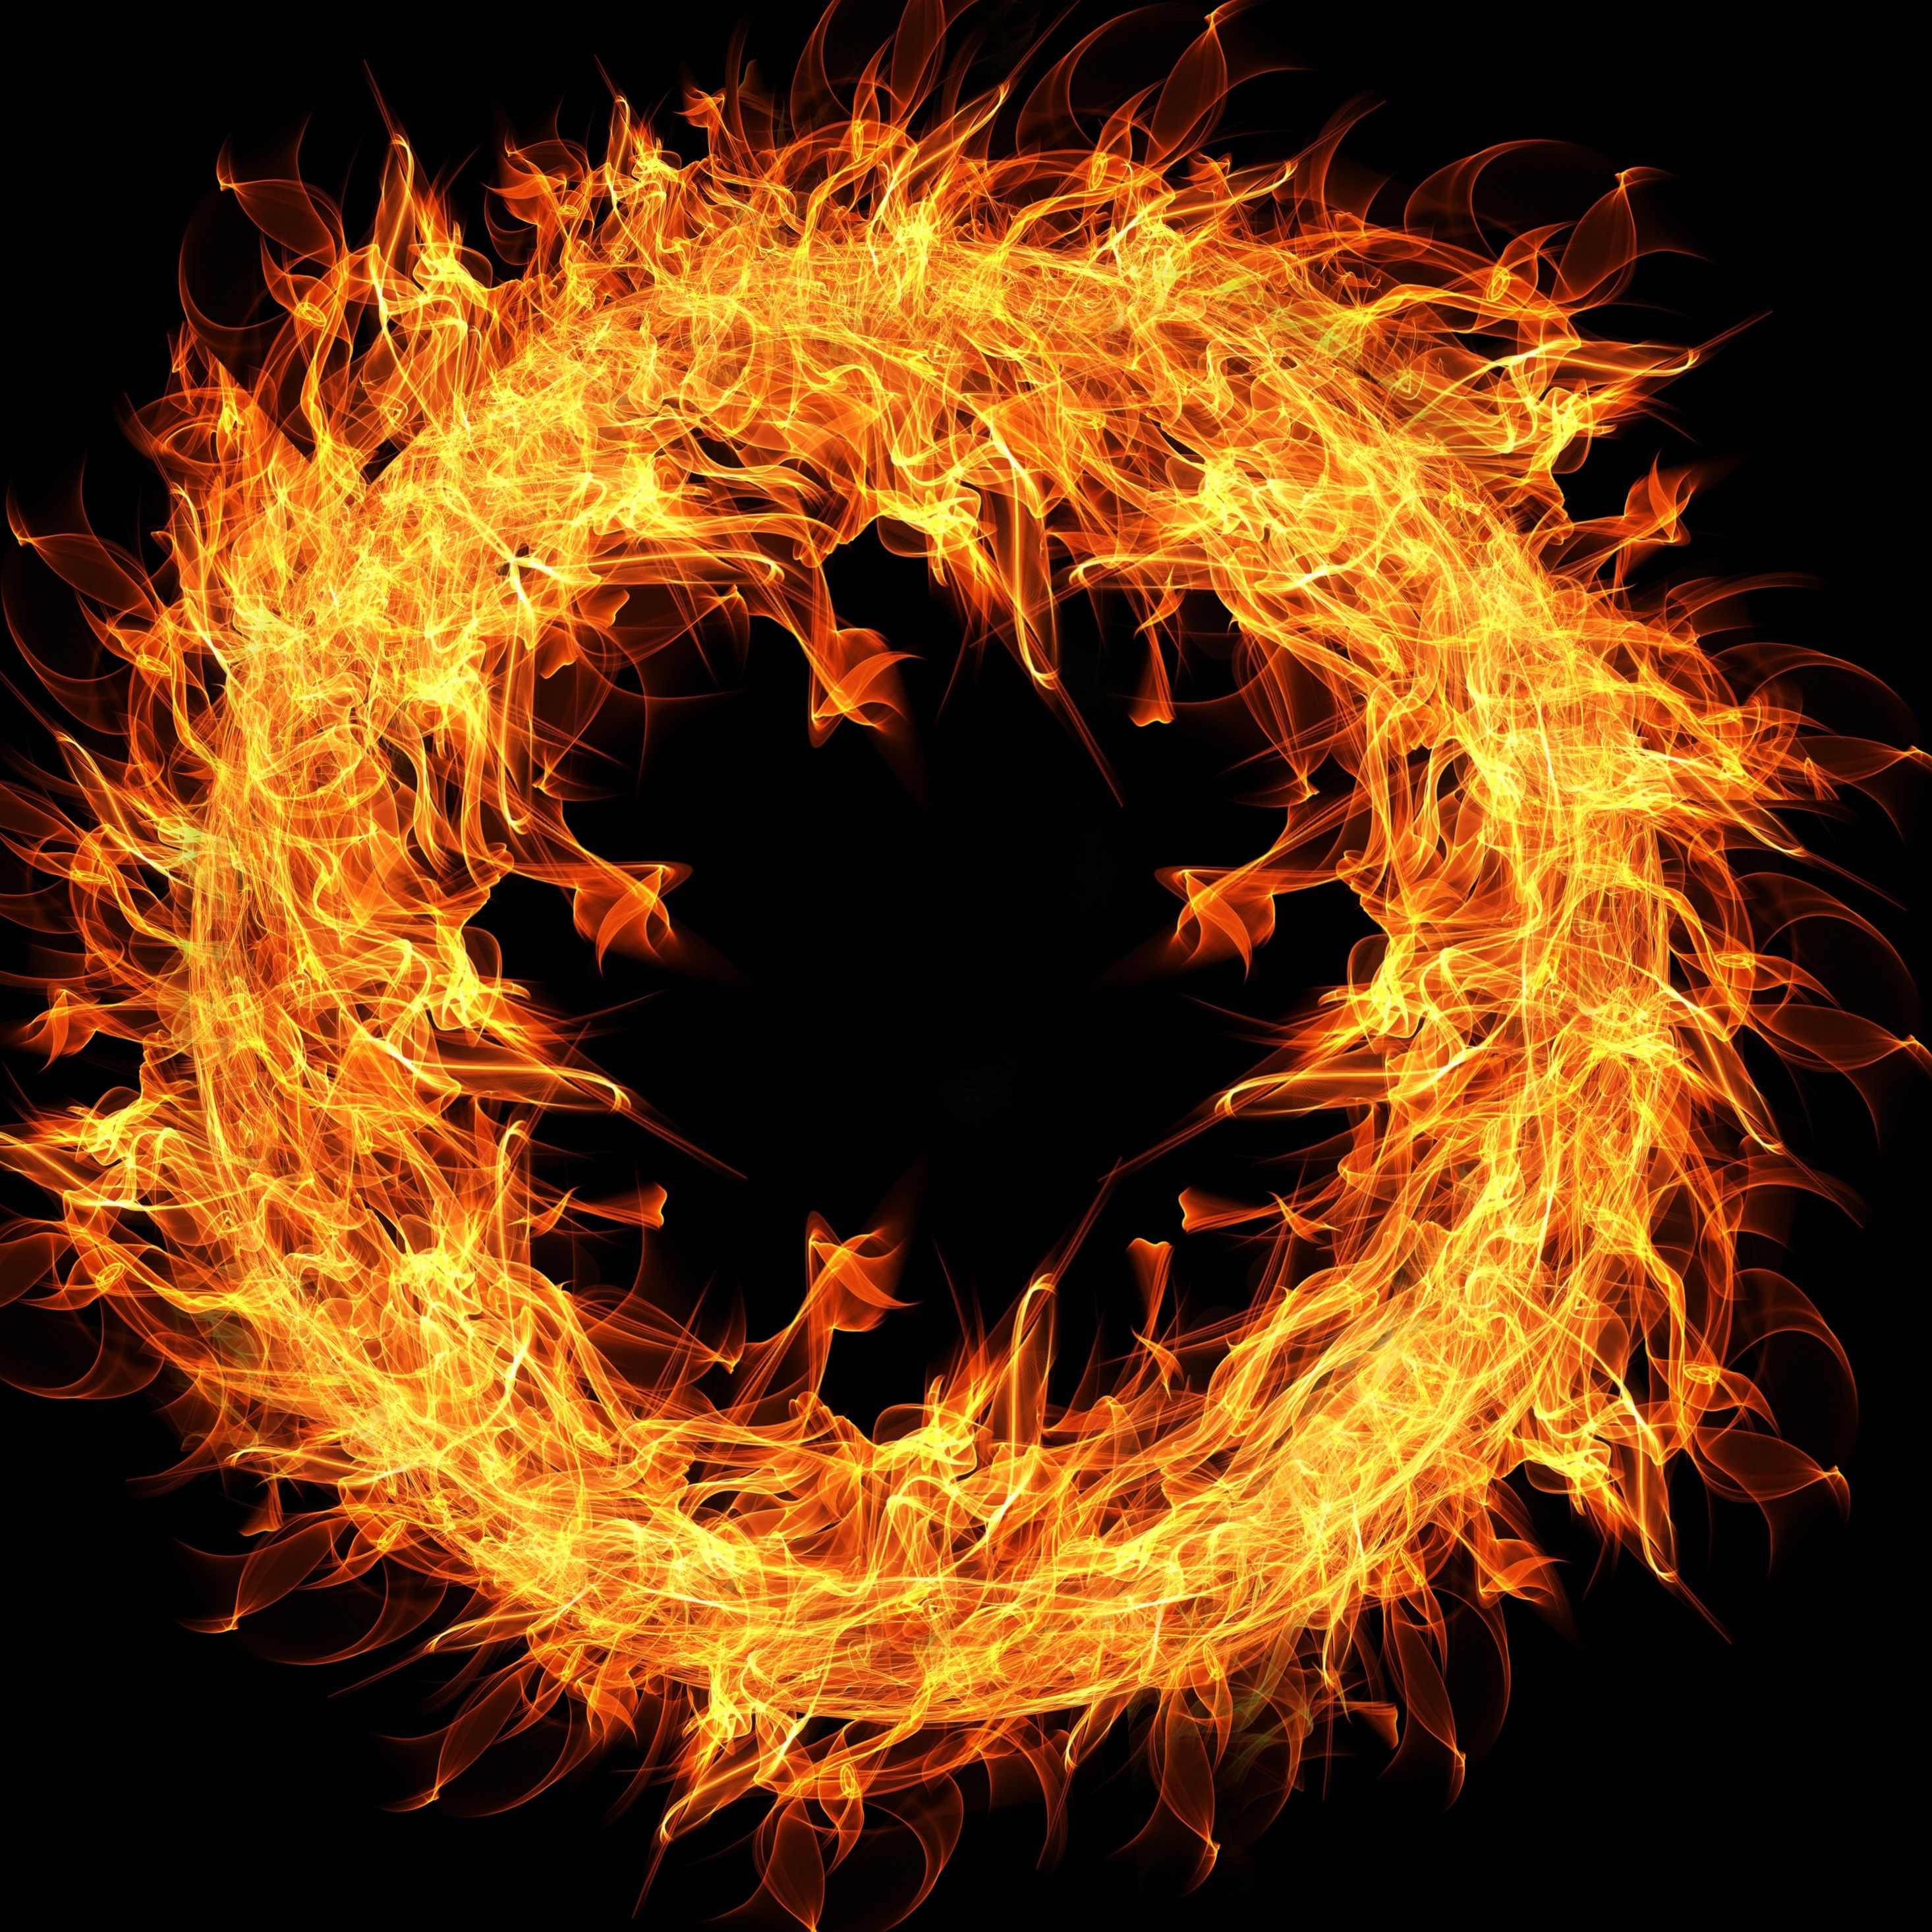 Fire Flame Ring 4k iPad Pro Retina Display HD 4k Wallpaper, Image, Background, Photo and Picture